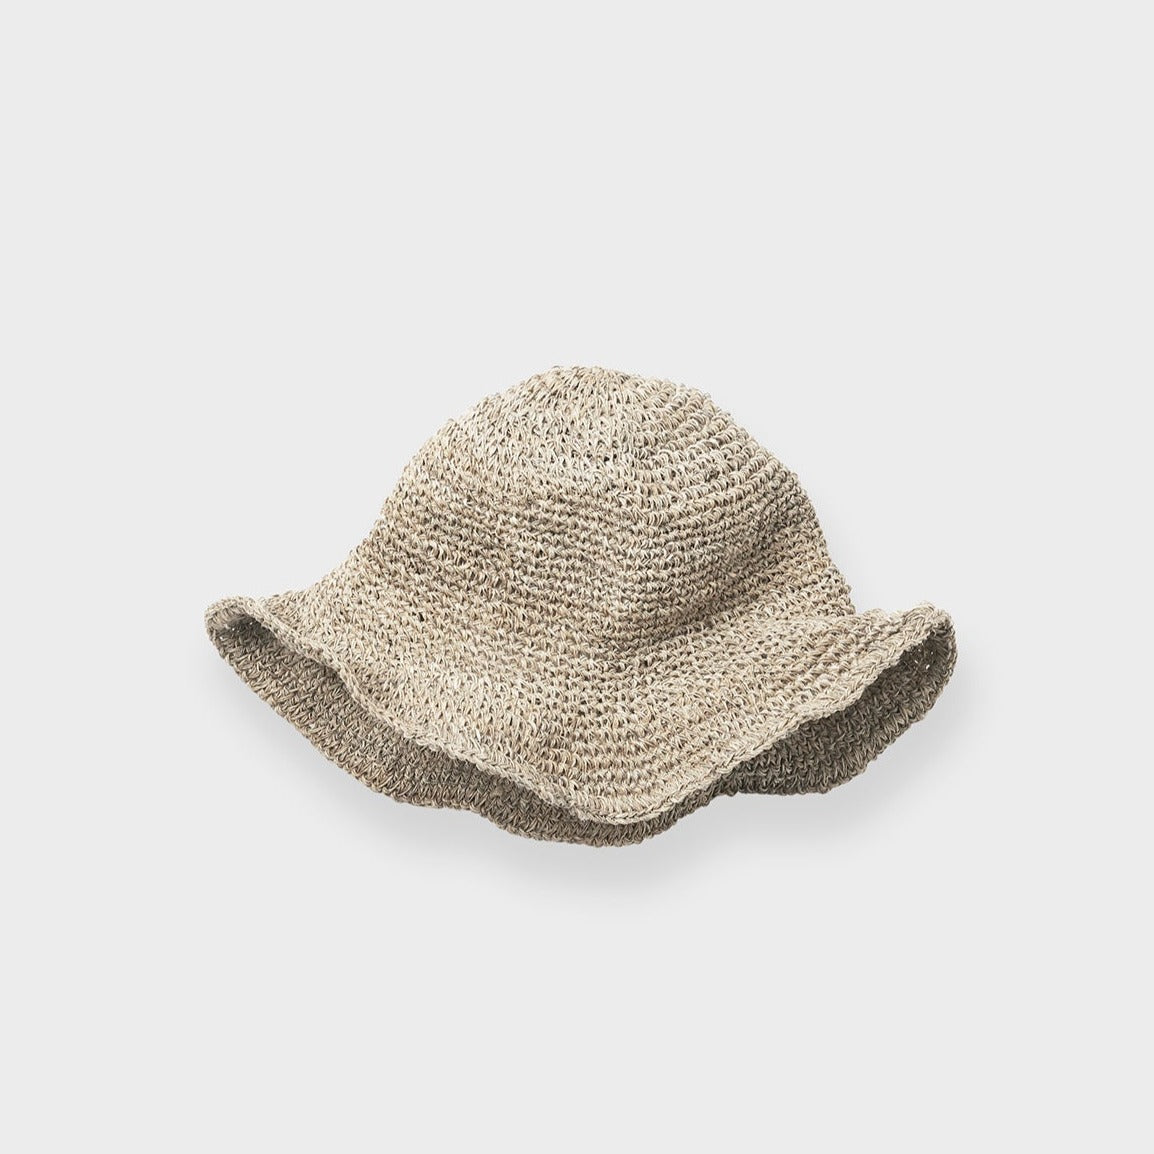 Care by Me, Sunhat handwoven in hemp and organic cotton. From Nepal